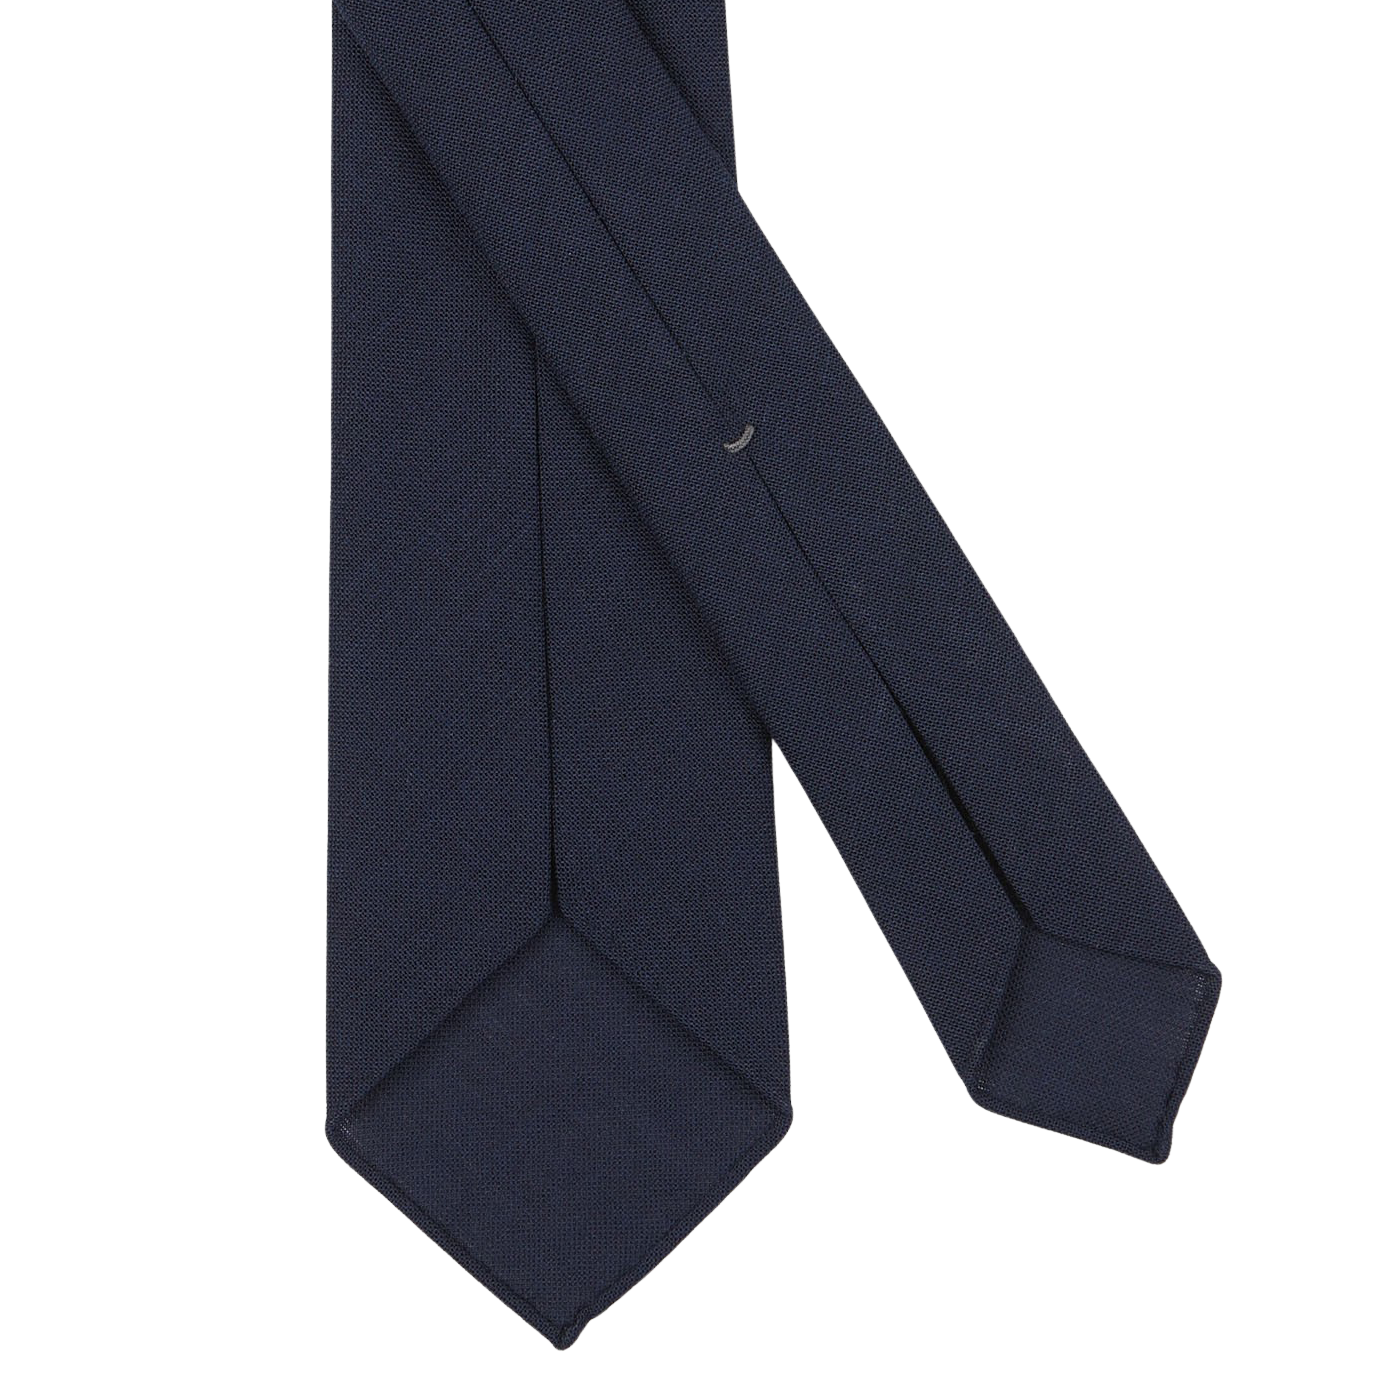 A close-up of a Dreaming Of Monday Navy Blue Wool Fresco 7-Fold Tie with a slim width and pointed ends, crafted from pure high-twist wool, set against a plain white background.